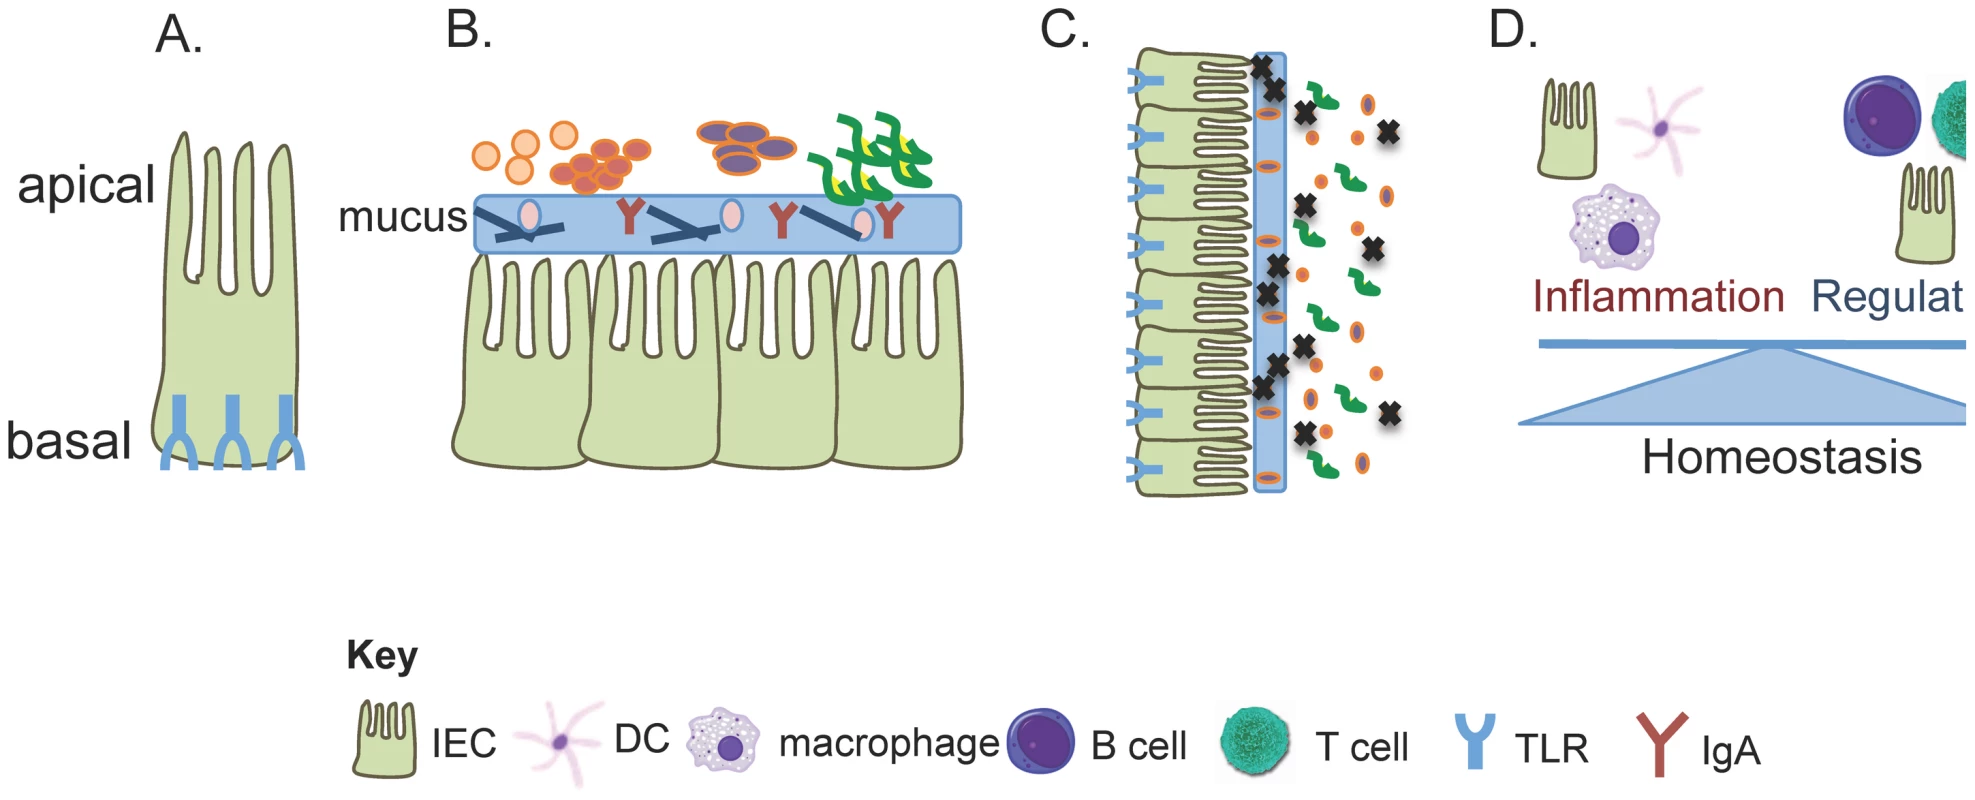 TLR signaling controls multiple pathways for tolerating the commensal microbiota.